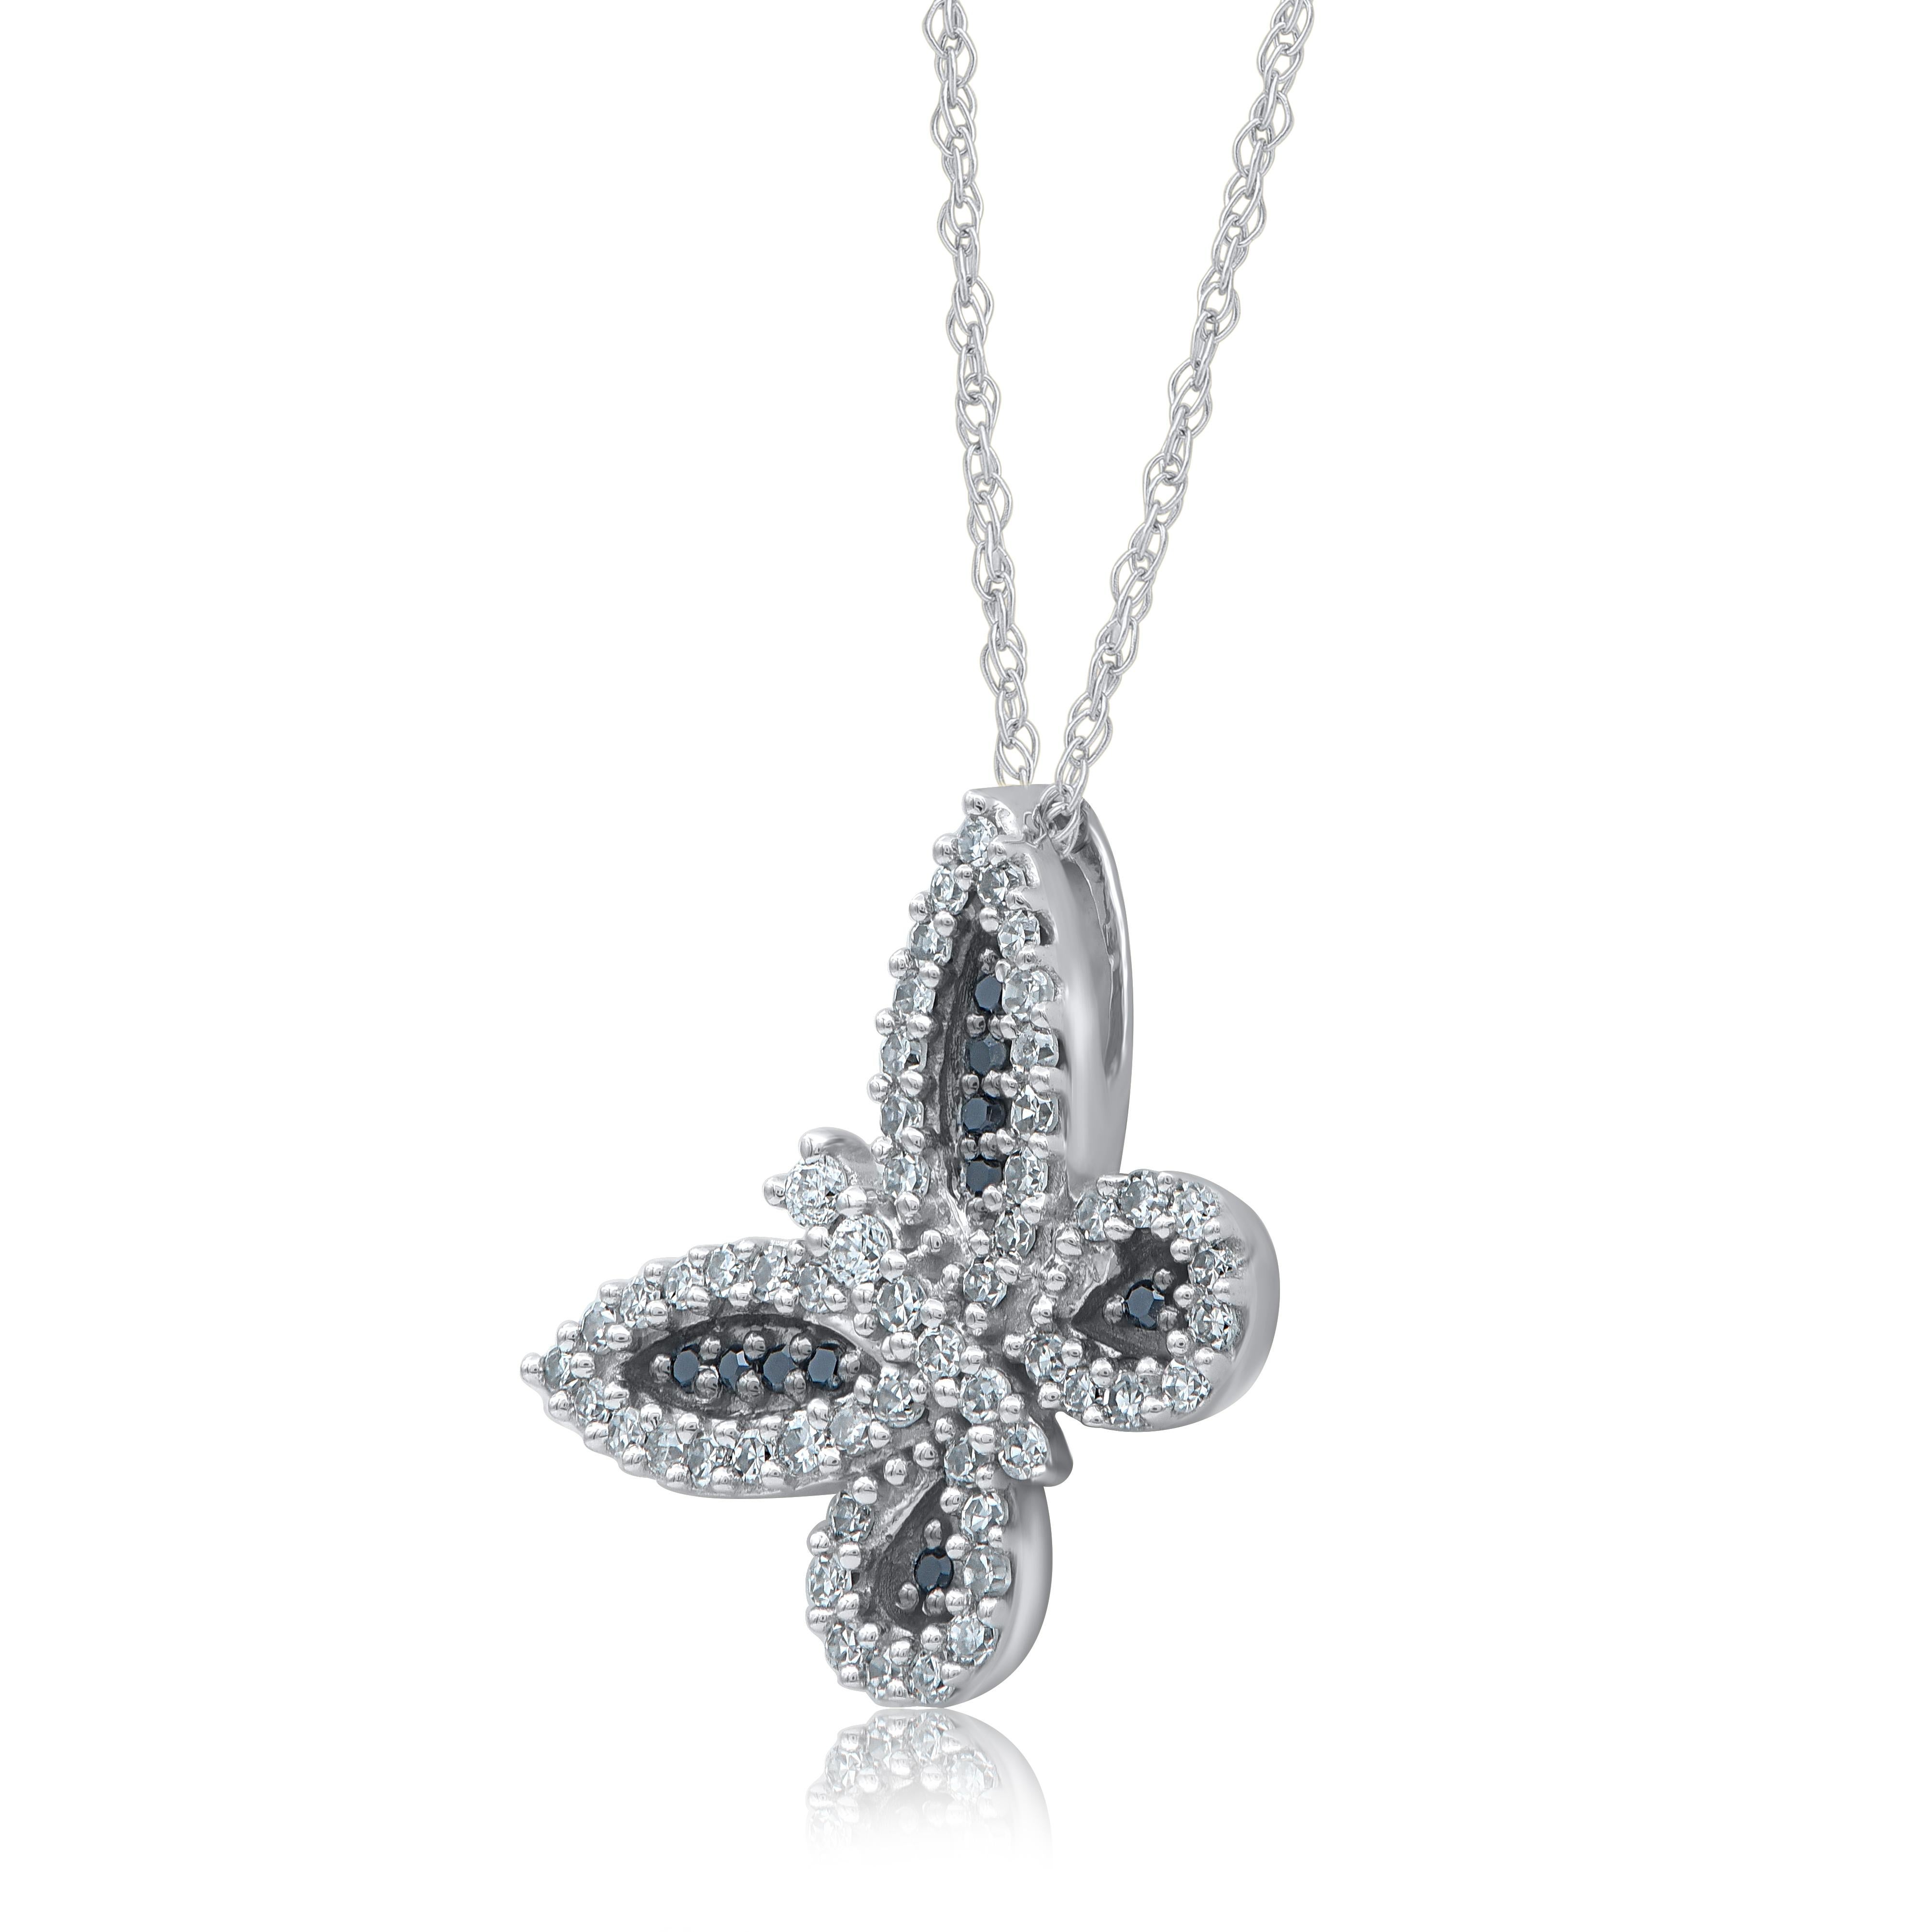 This butterfly pendant necklace fits any occasion with ease. These pendants are studded with round 64 single cut, brilliant cut and black treated diamonds in pave & prong setting in 14 karat white gold. Diamonds are graded as H-I color and I-2